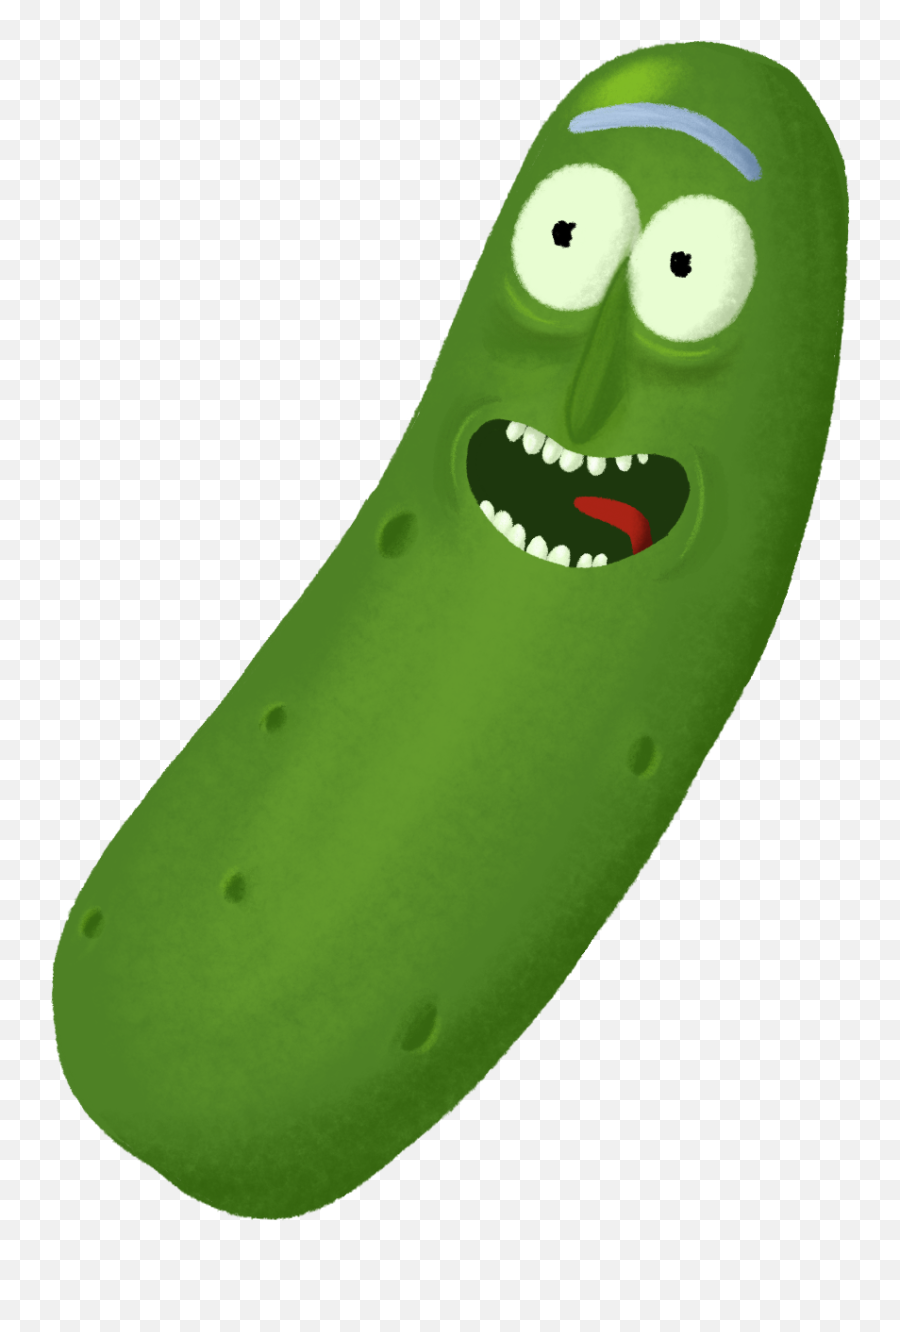 Pickle Rick Sold By Ariu2019s Arts - Pickle Rick Transparent Background Png,Pickle Rick Png